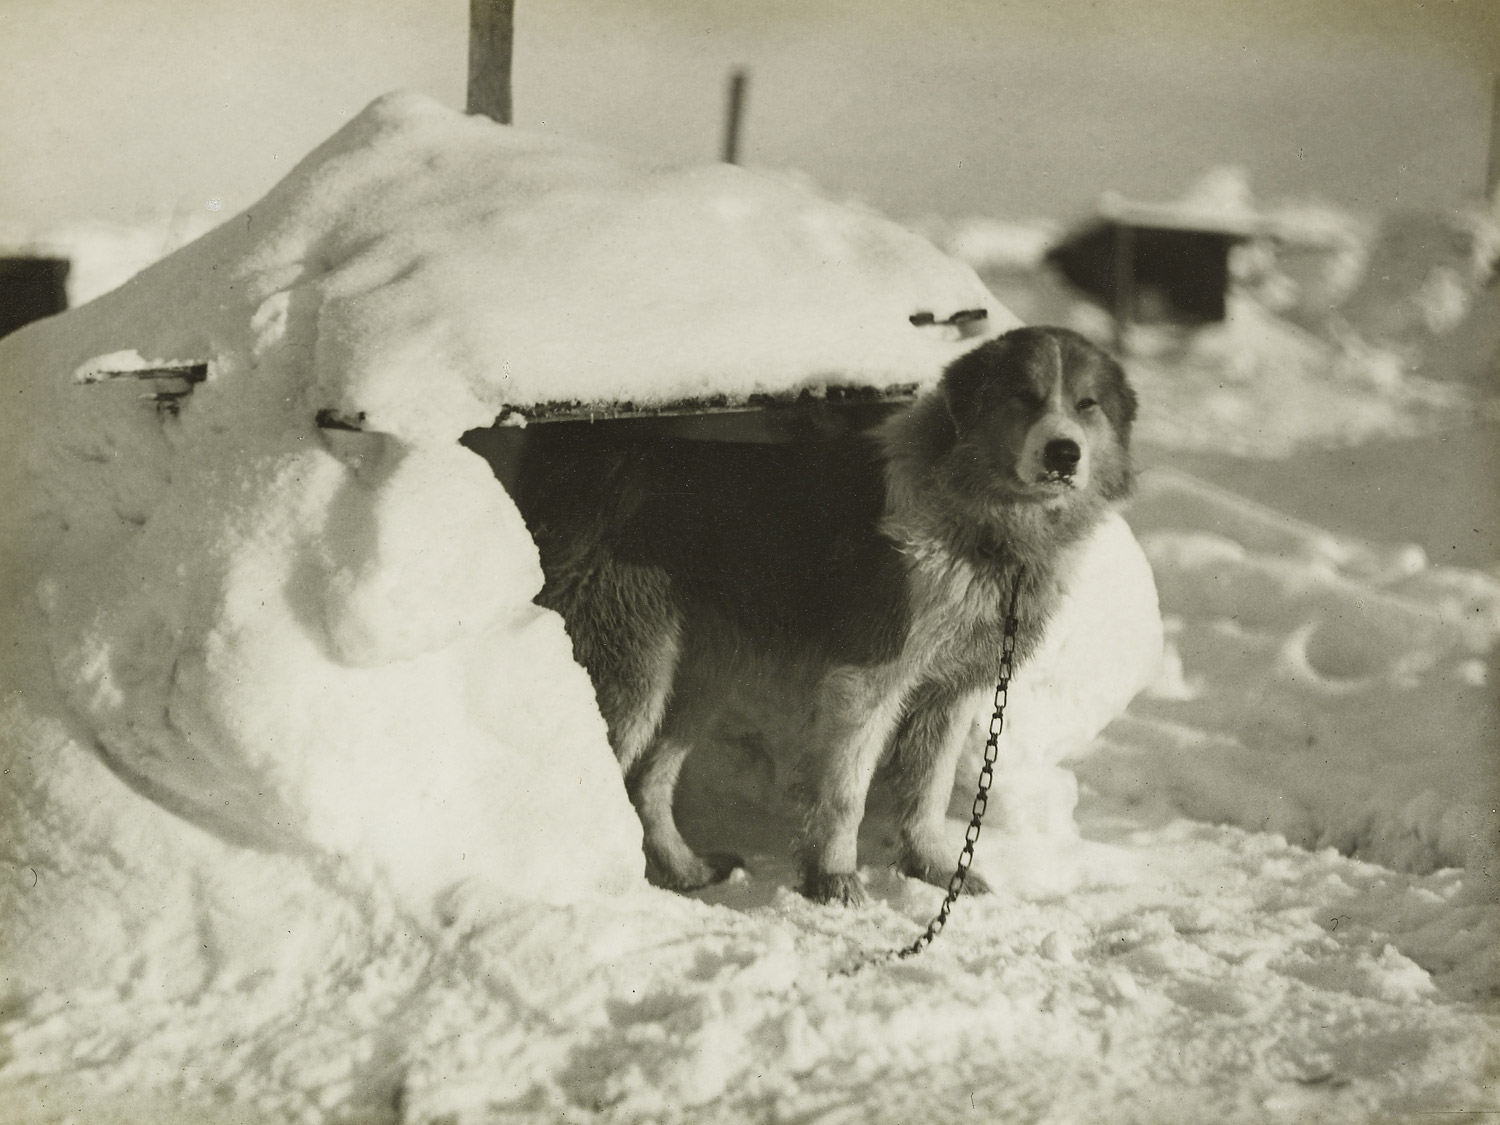 Samson, one of the sledge dogs, at the entrance to his dogloo in February 1915.